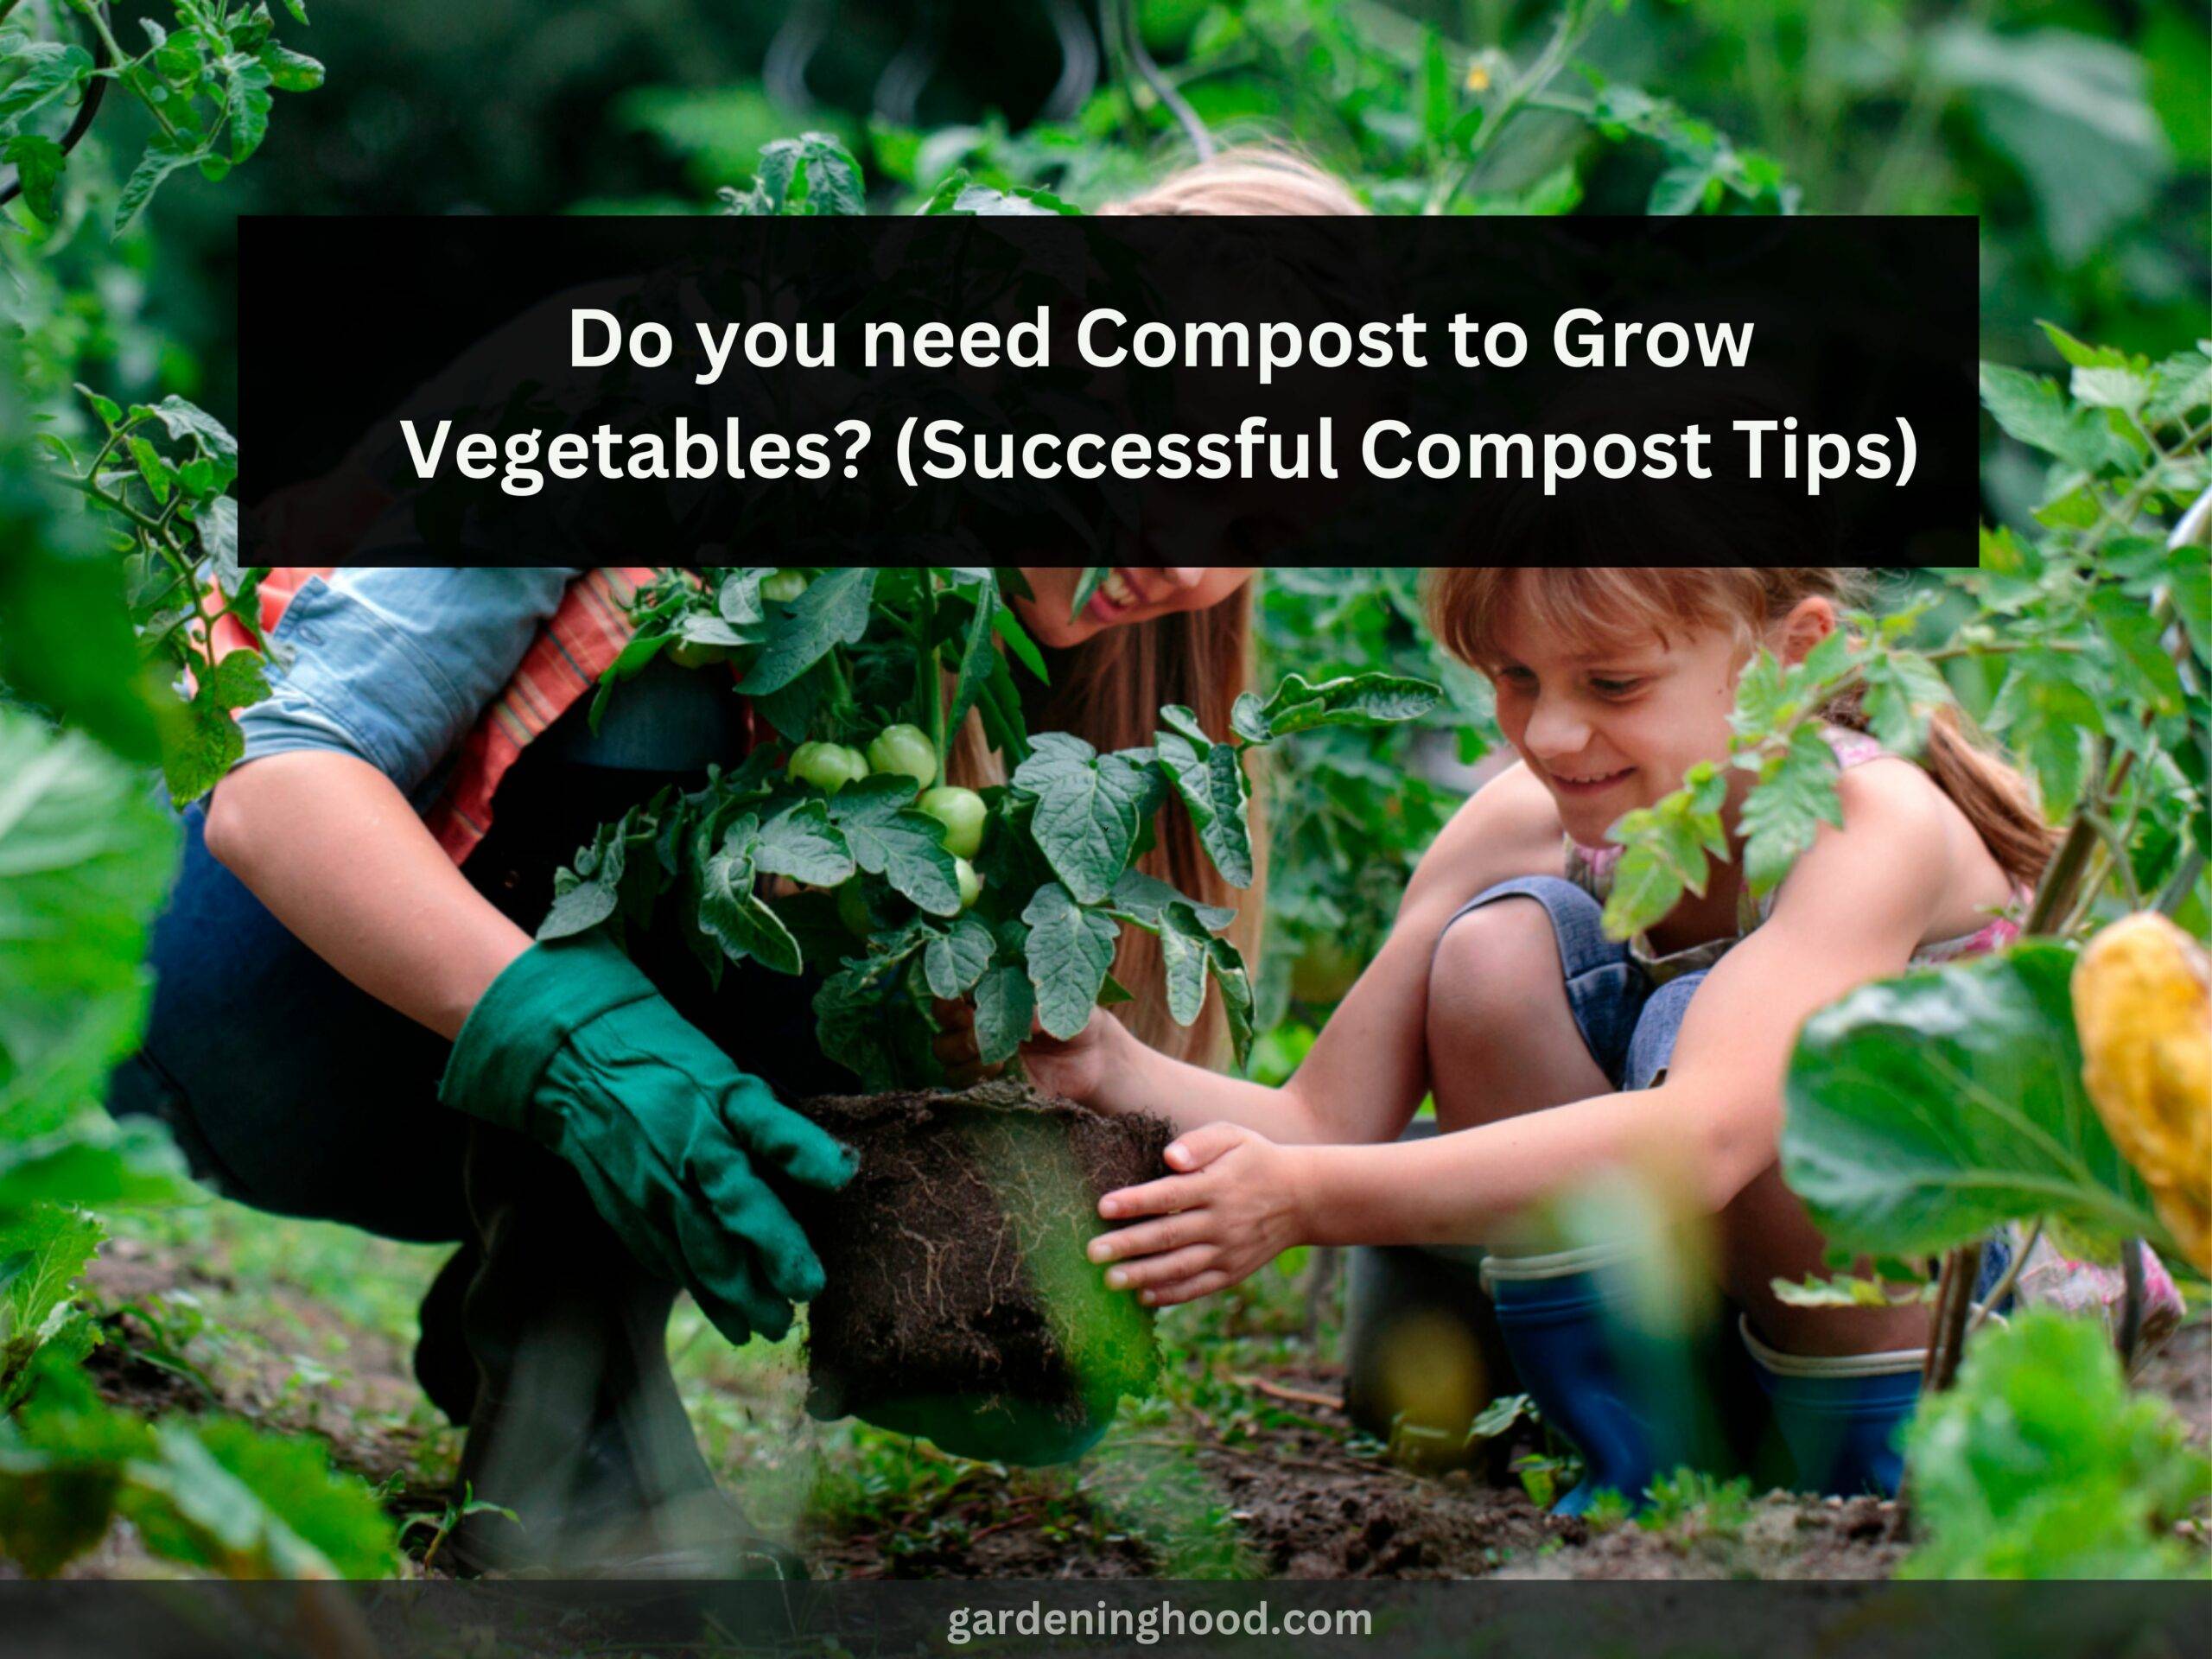 Do you need Compost to Grow Vegetables? (Successful Compost Tips)